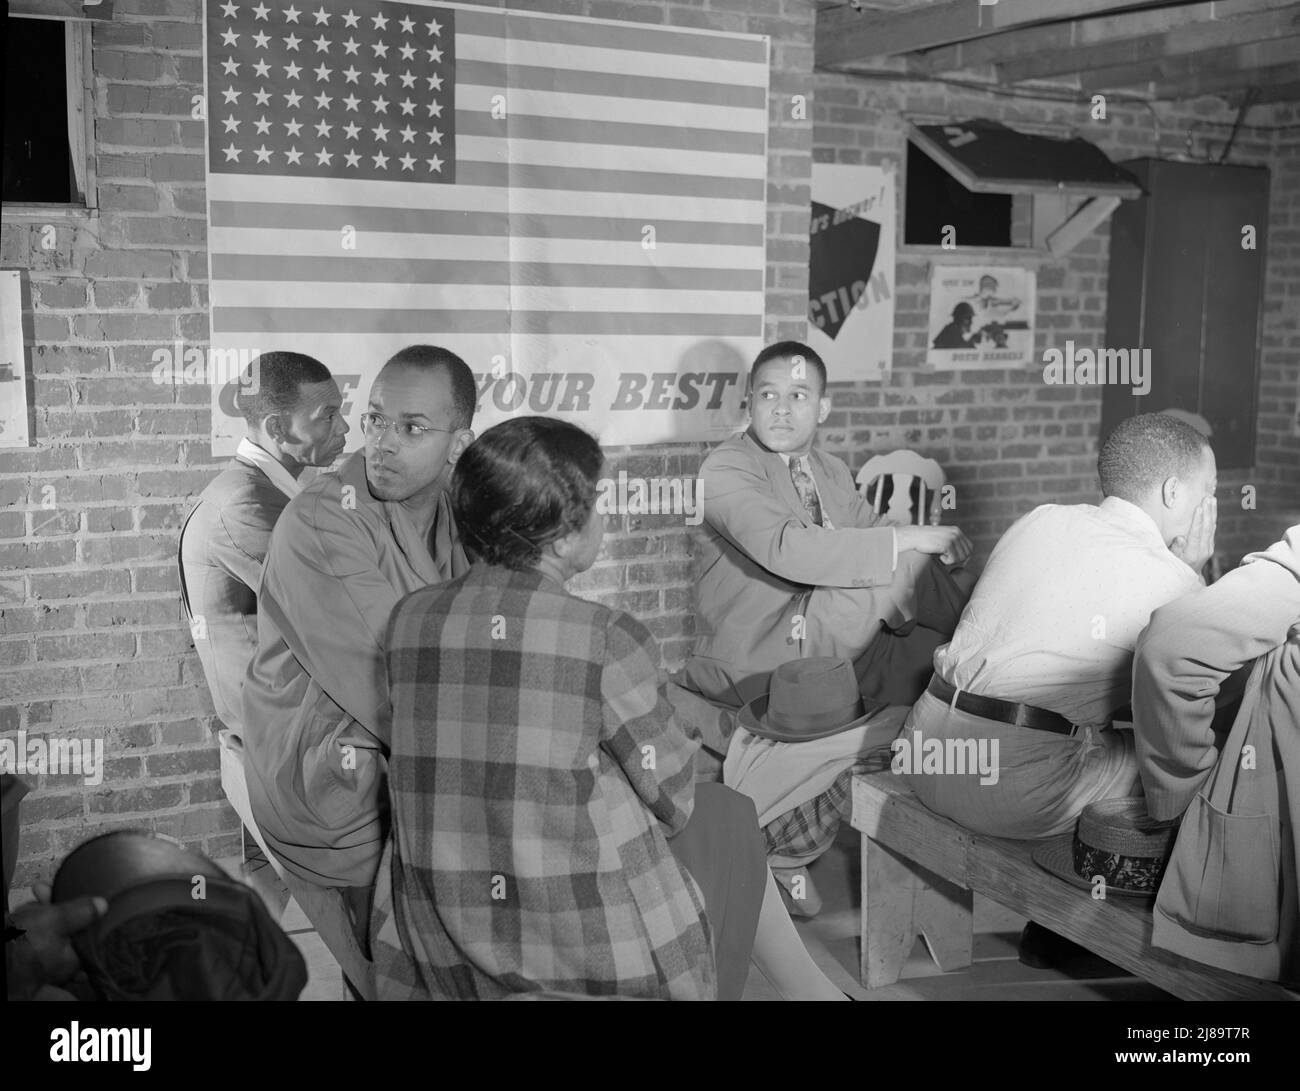 Washington, D.C. Air raid wardens' meeting in zone nine, Southwest area. Air raid wardens listening to a report by one of the wardens at a meeting in their zone headquarters. Stock Photo